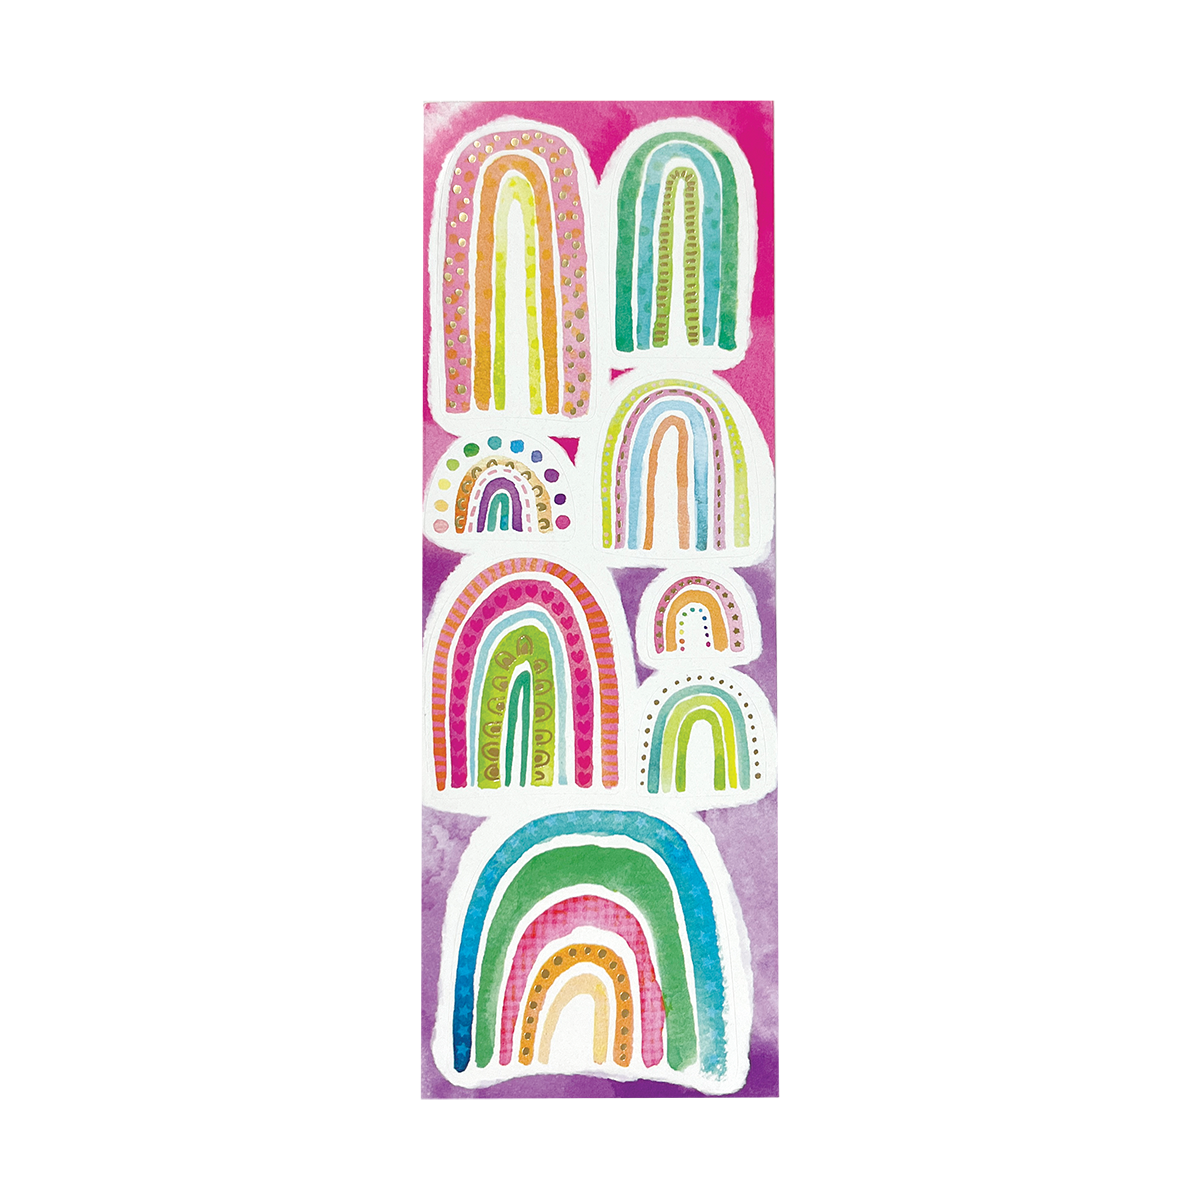 Rainbow Sparkle Metallic Watercolor Gel Crayons by OOLY – Lyla's: Clothing,  Decor & More